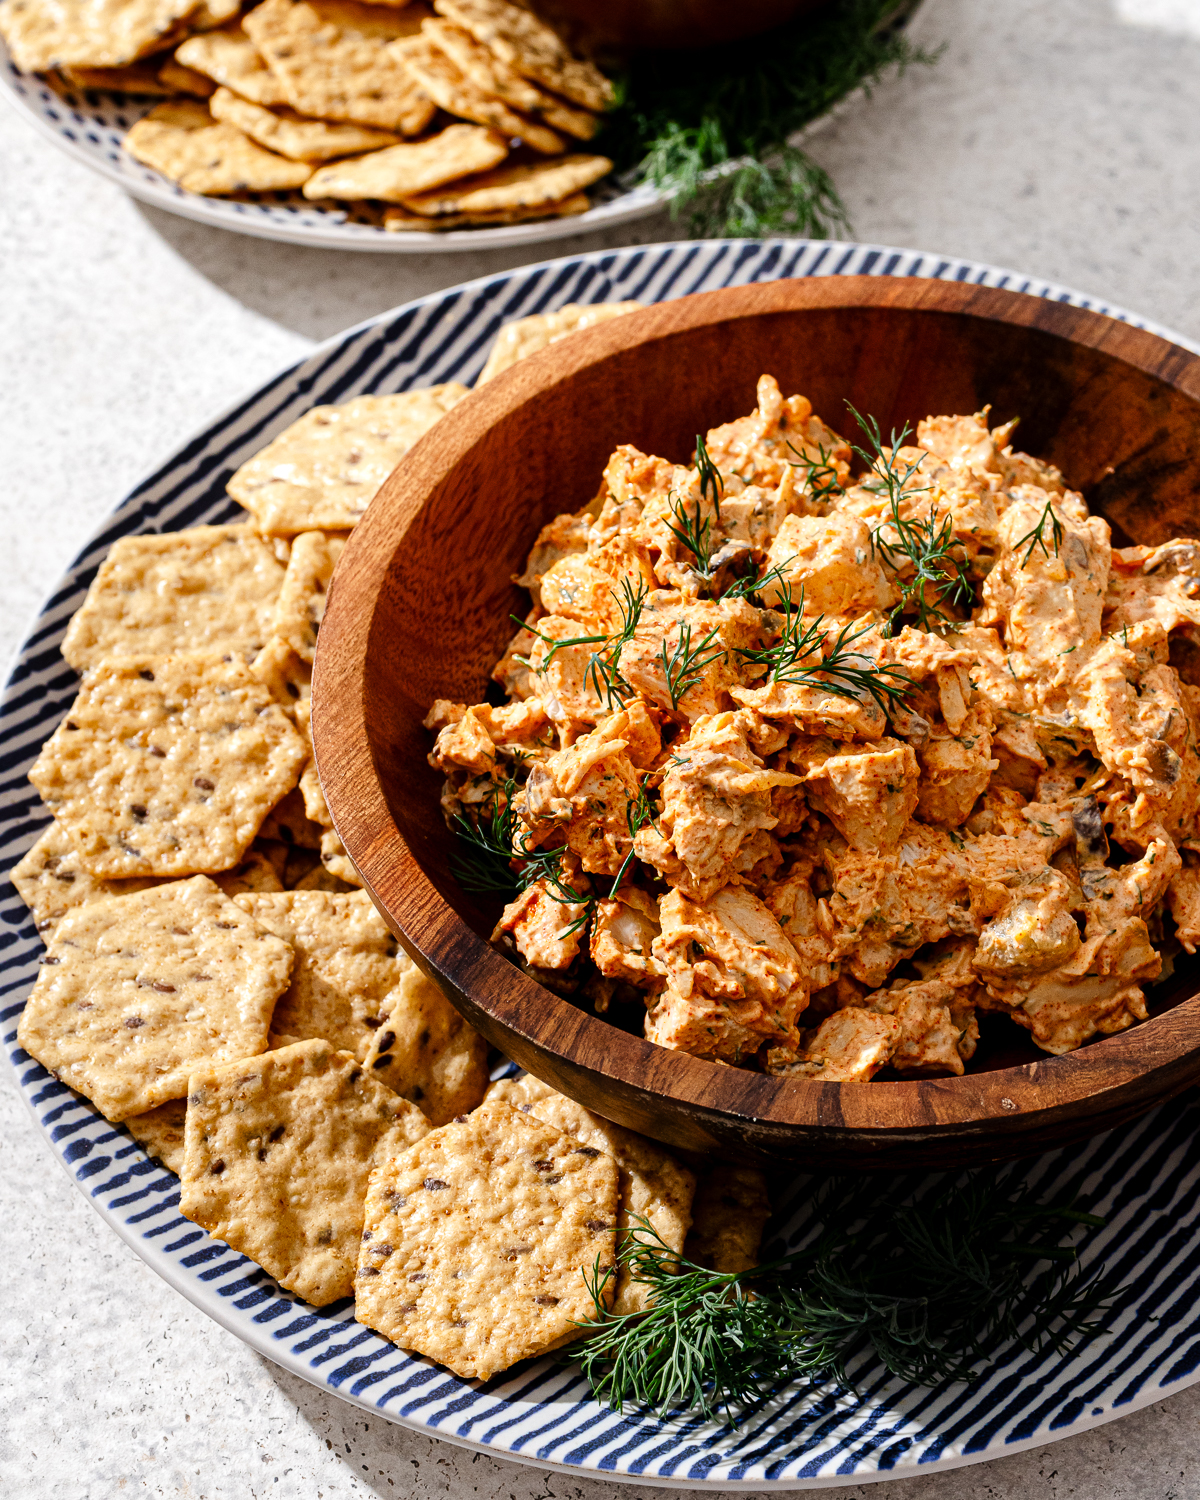 A serving of high protein chicken salad in a wooden bowl with crackers and garnish.